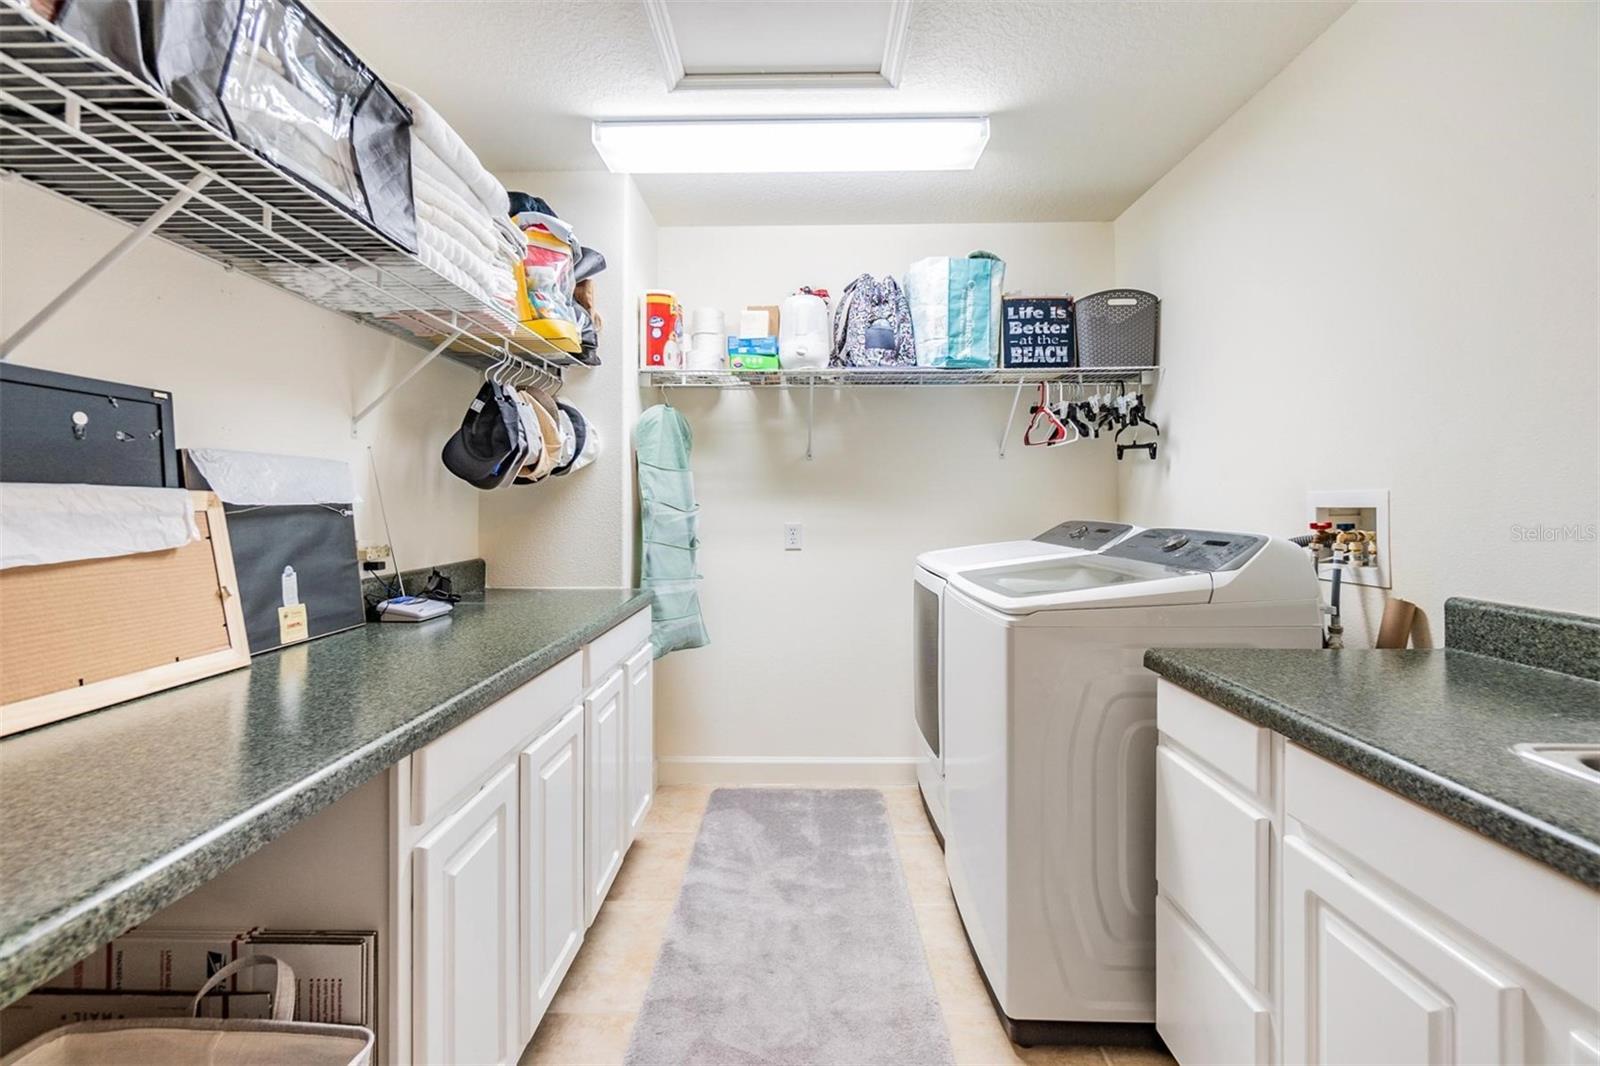 Laundry room with plenty of counter space.